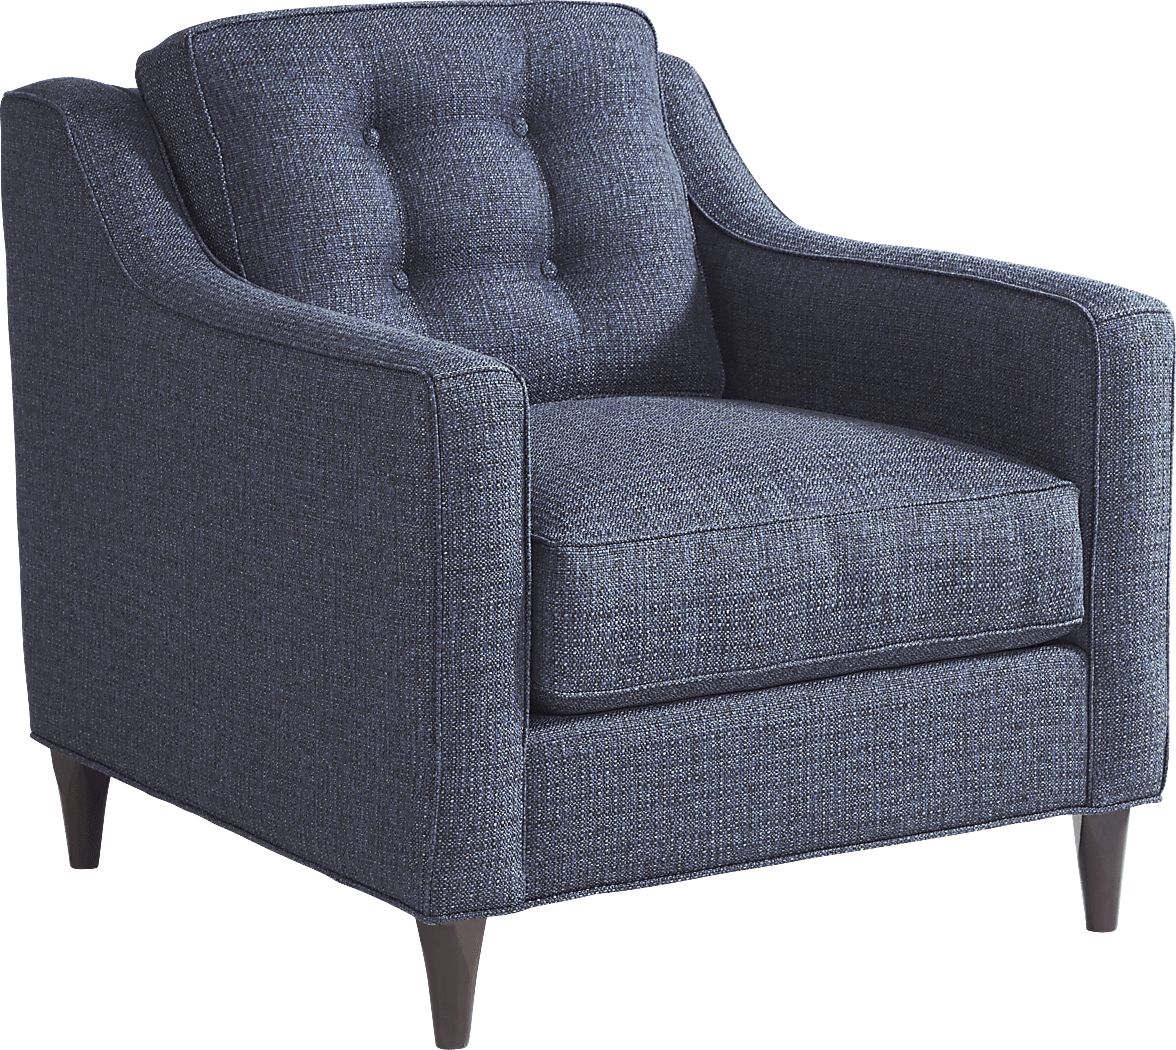 Cindy Crawford Home Hanover Midnight Textured Chair